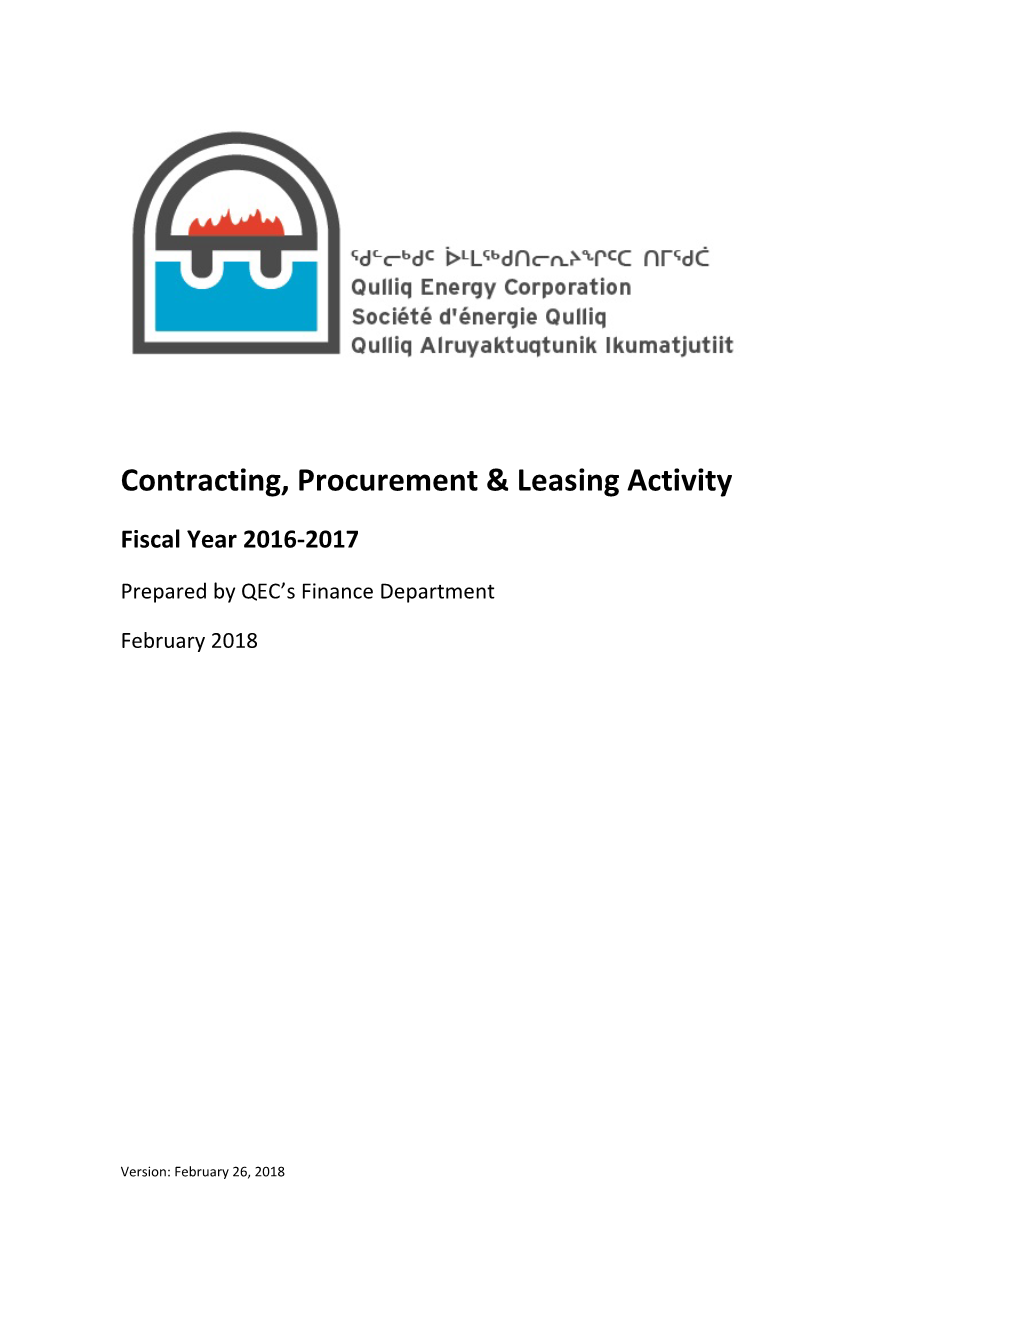 Contracting, Procurement and Leasing Activity Report 2016-2017